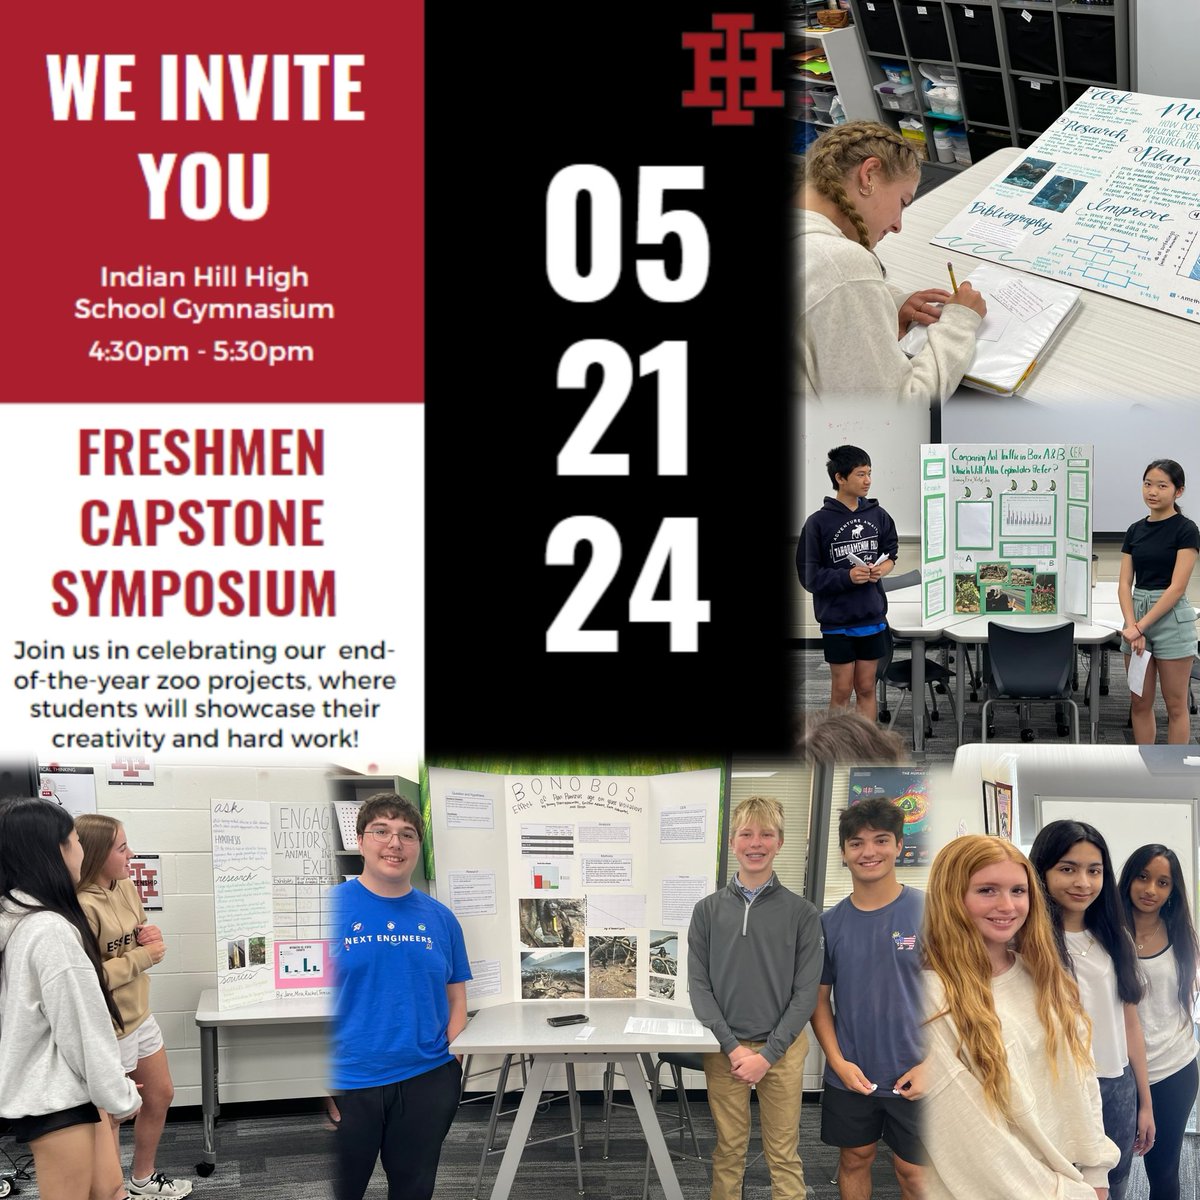 Join us TOMORROW at the Freshmen Capstone Symposium‼️ Interdepartmental collaboration from our English, Science & Math classes. Don't miss this display of creativity & innovation, where students redefine the boundaries of interdisciplinary learning‼️ @IHSchools #IHPromise